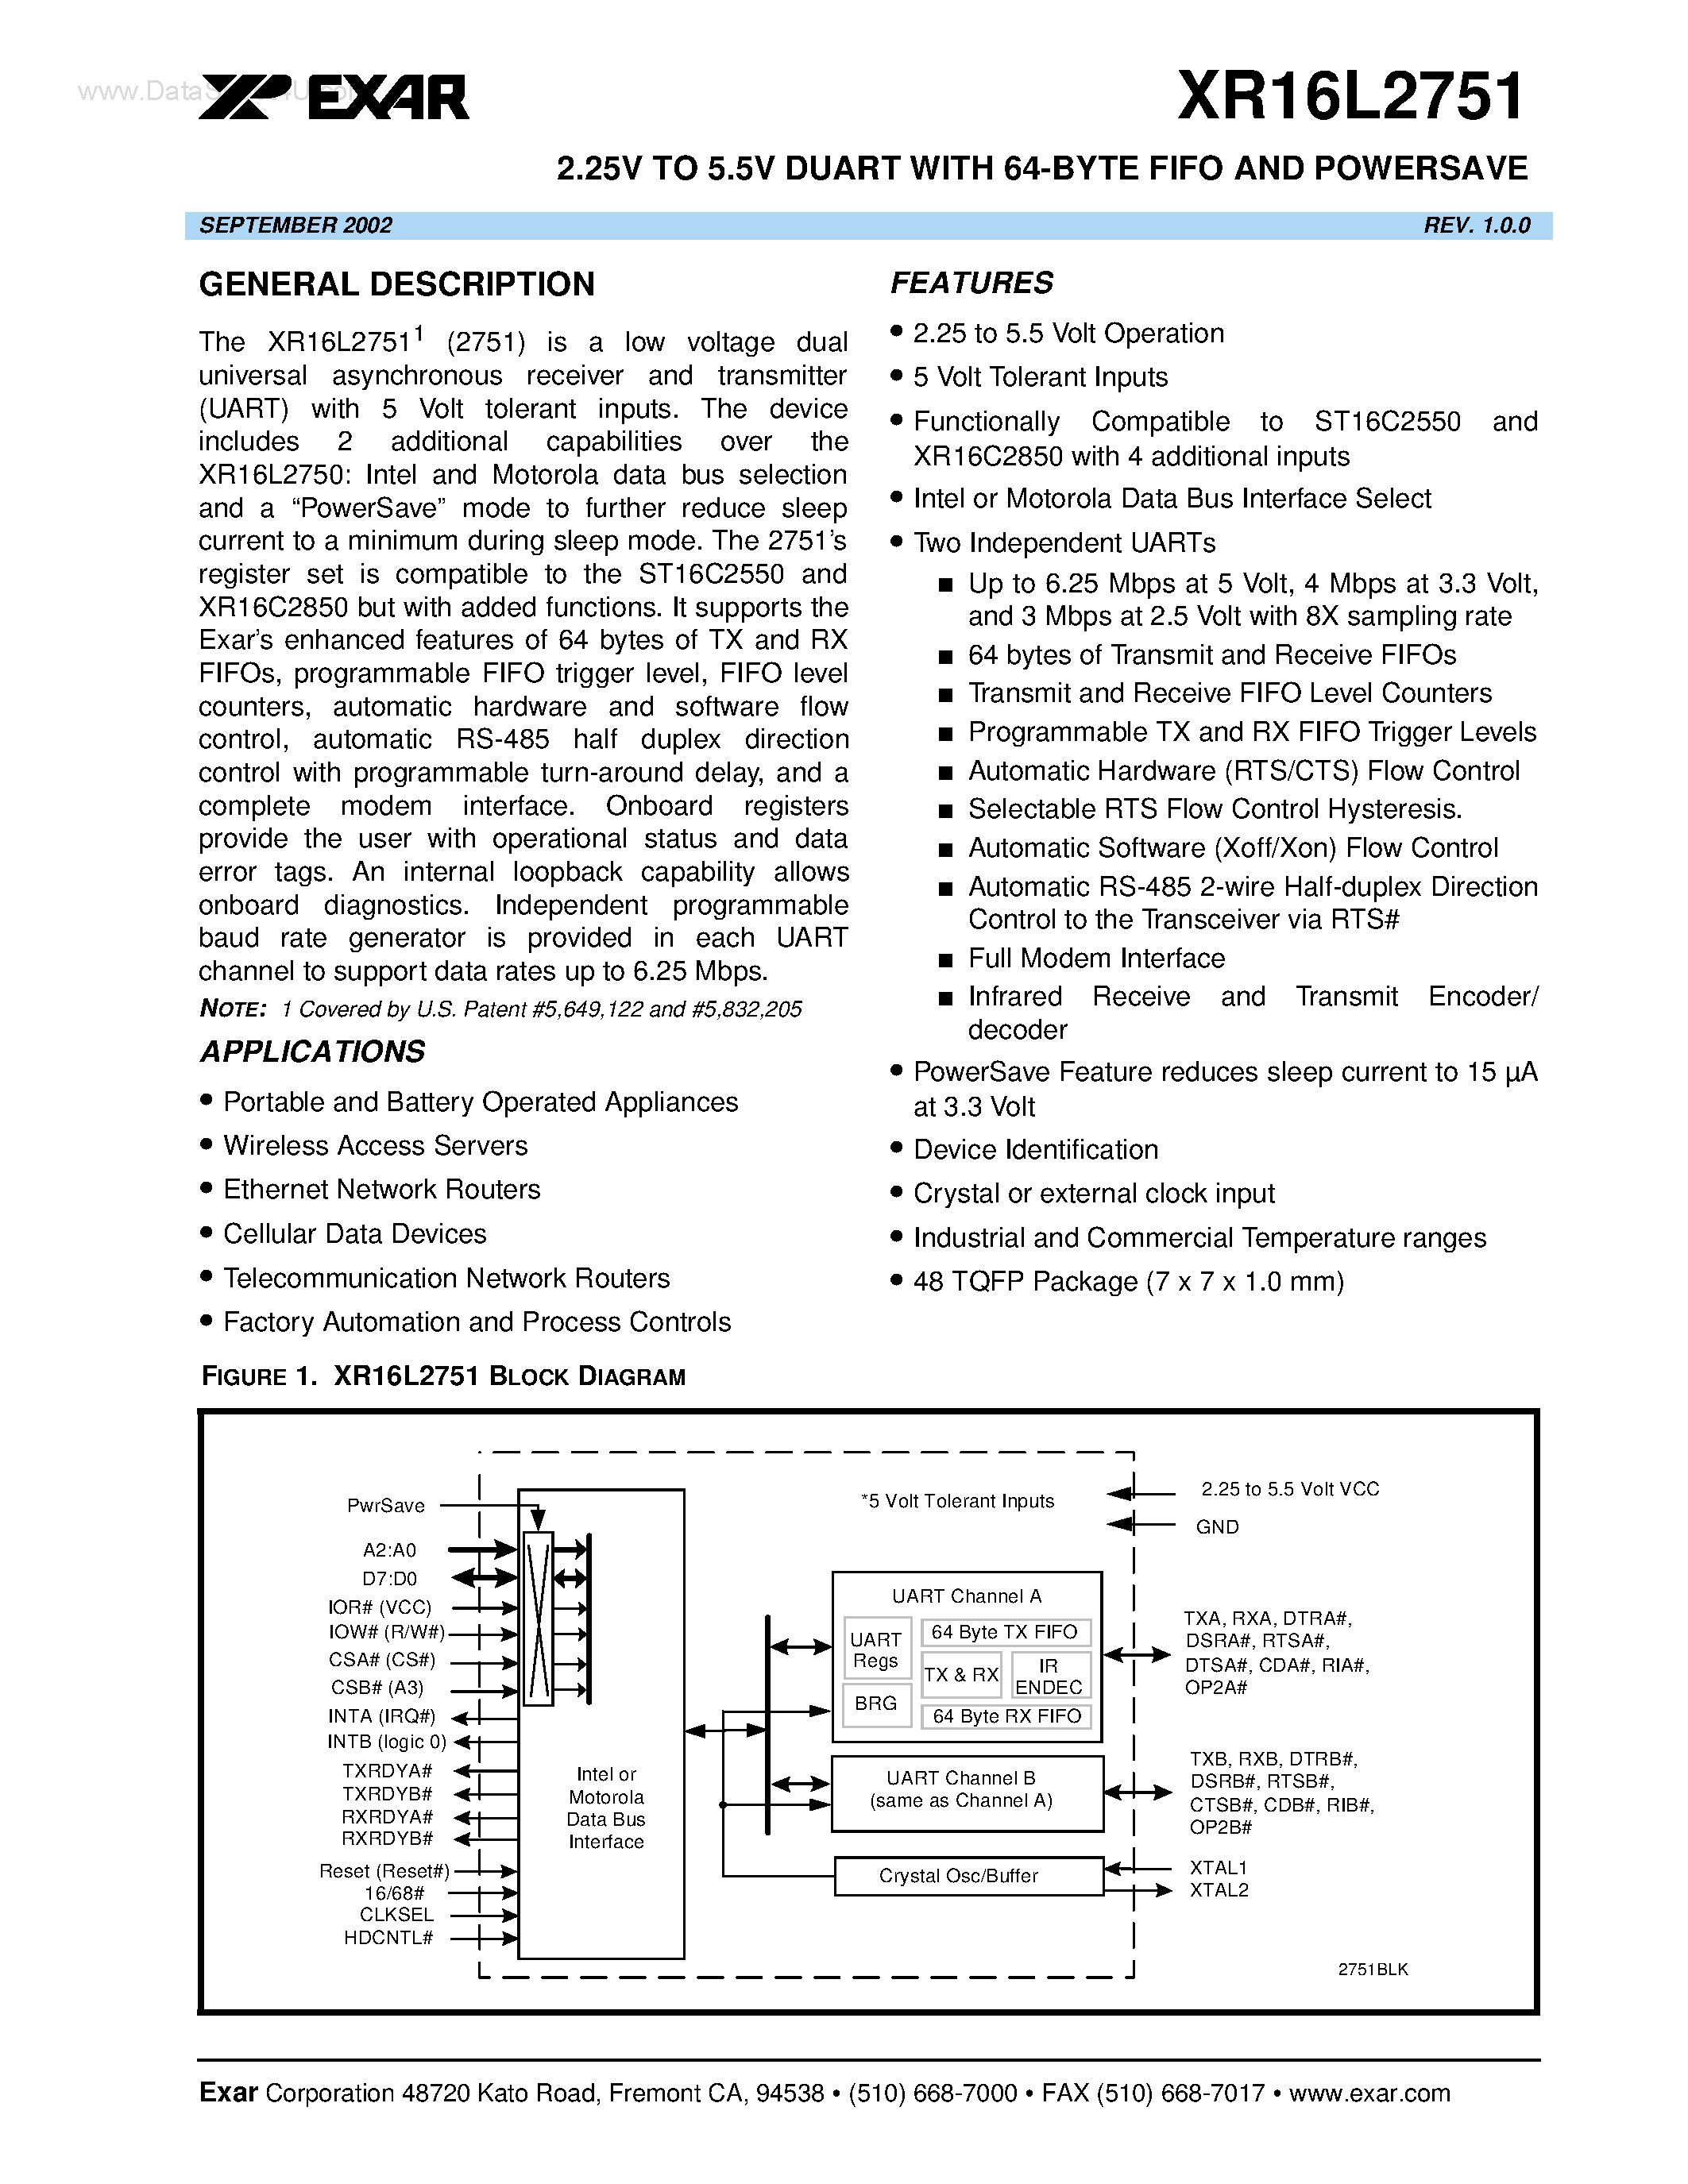 Datasheet XR16L2751CM - 2.25V TO 5.5V DUART WITH 64-BYTE FIFO AND POWERSAVE page 1